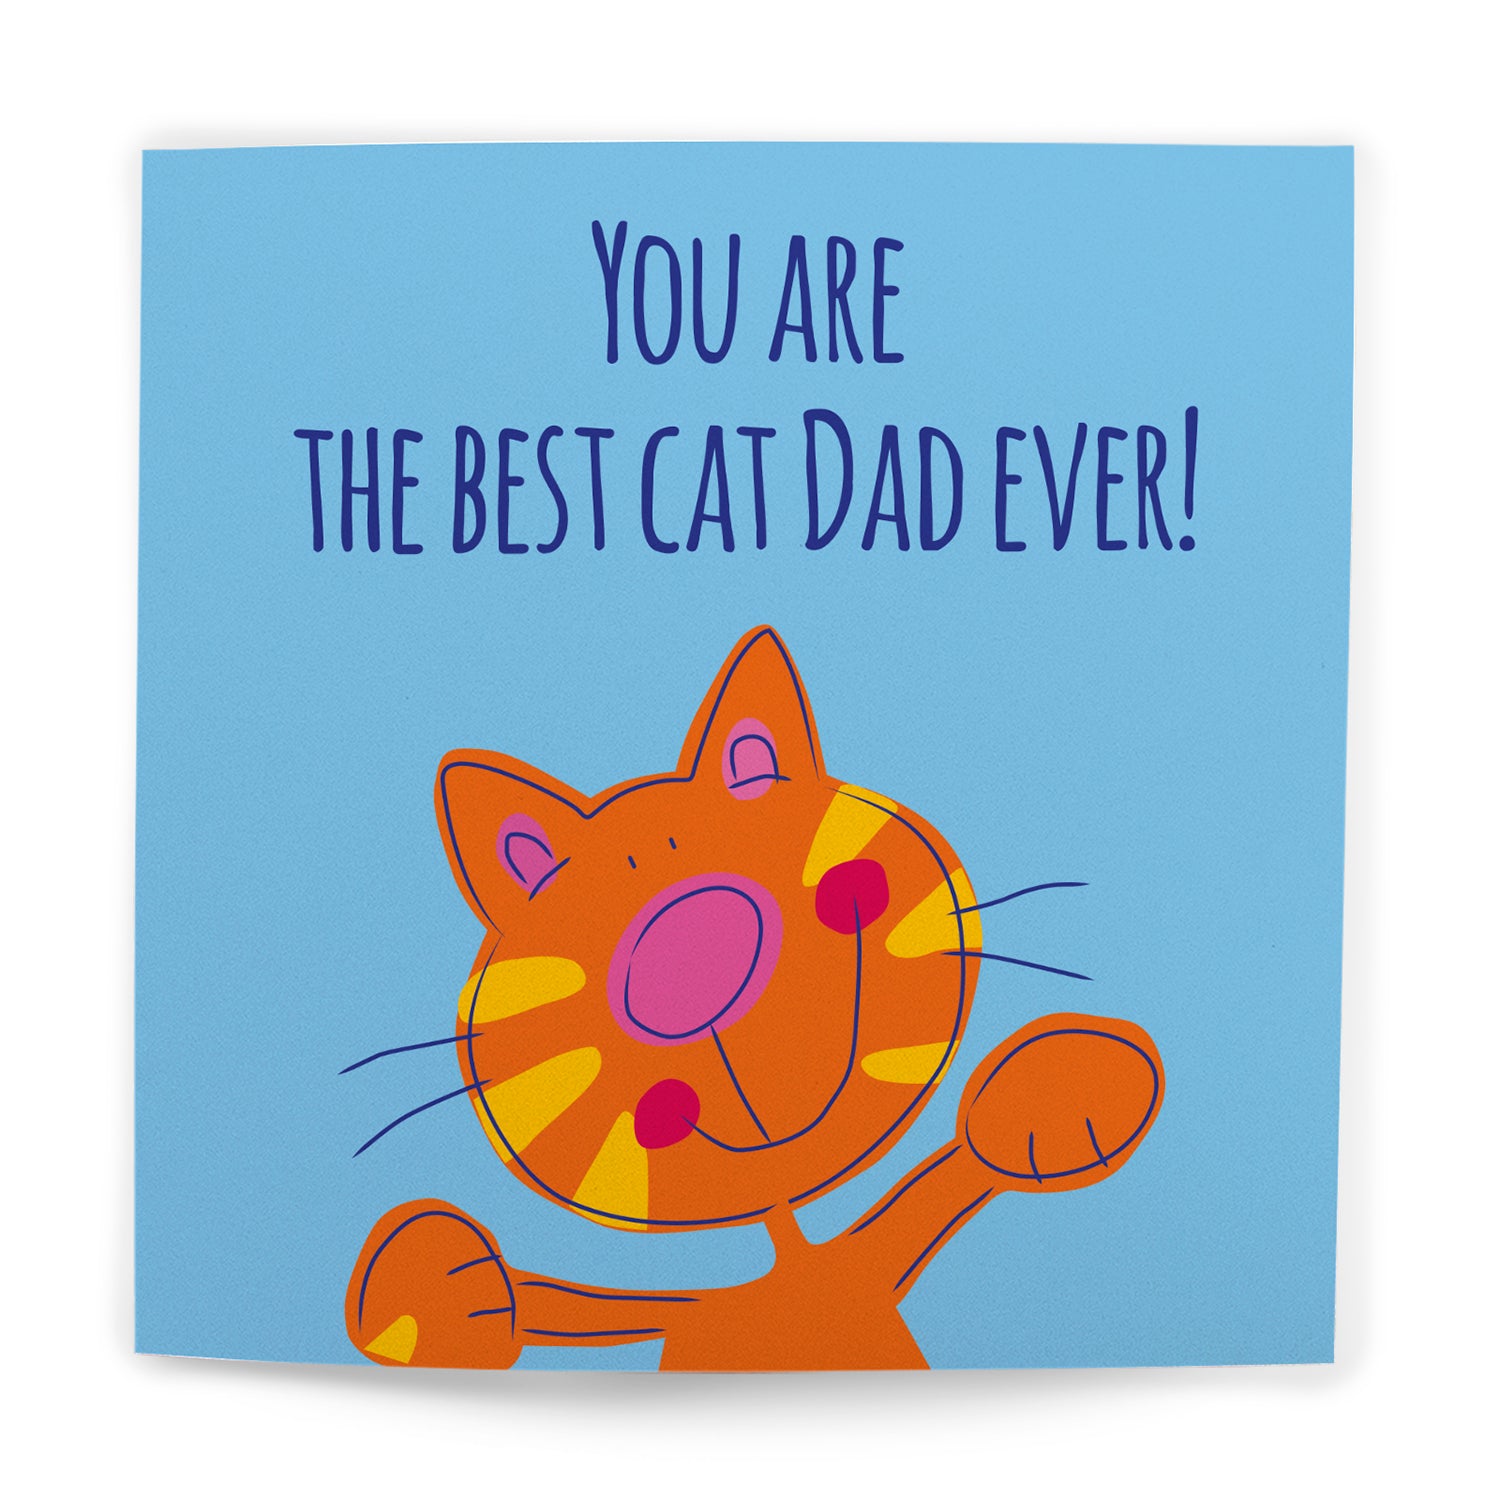 Best cat dad ever - father's day card from the cat - Funny card - Michton - UK